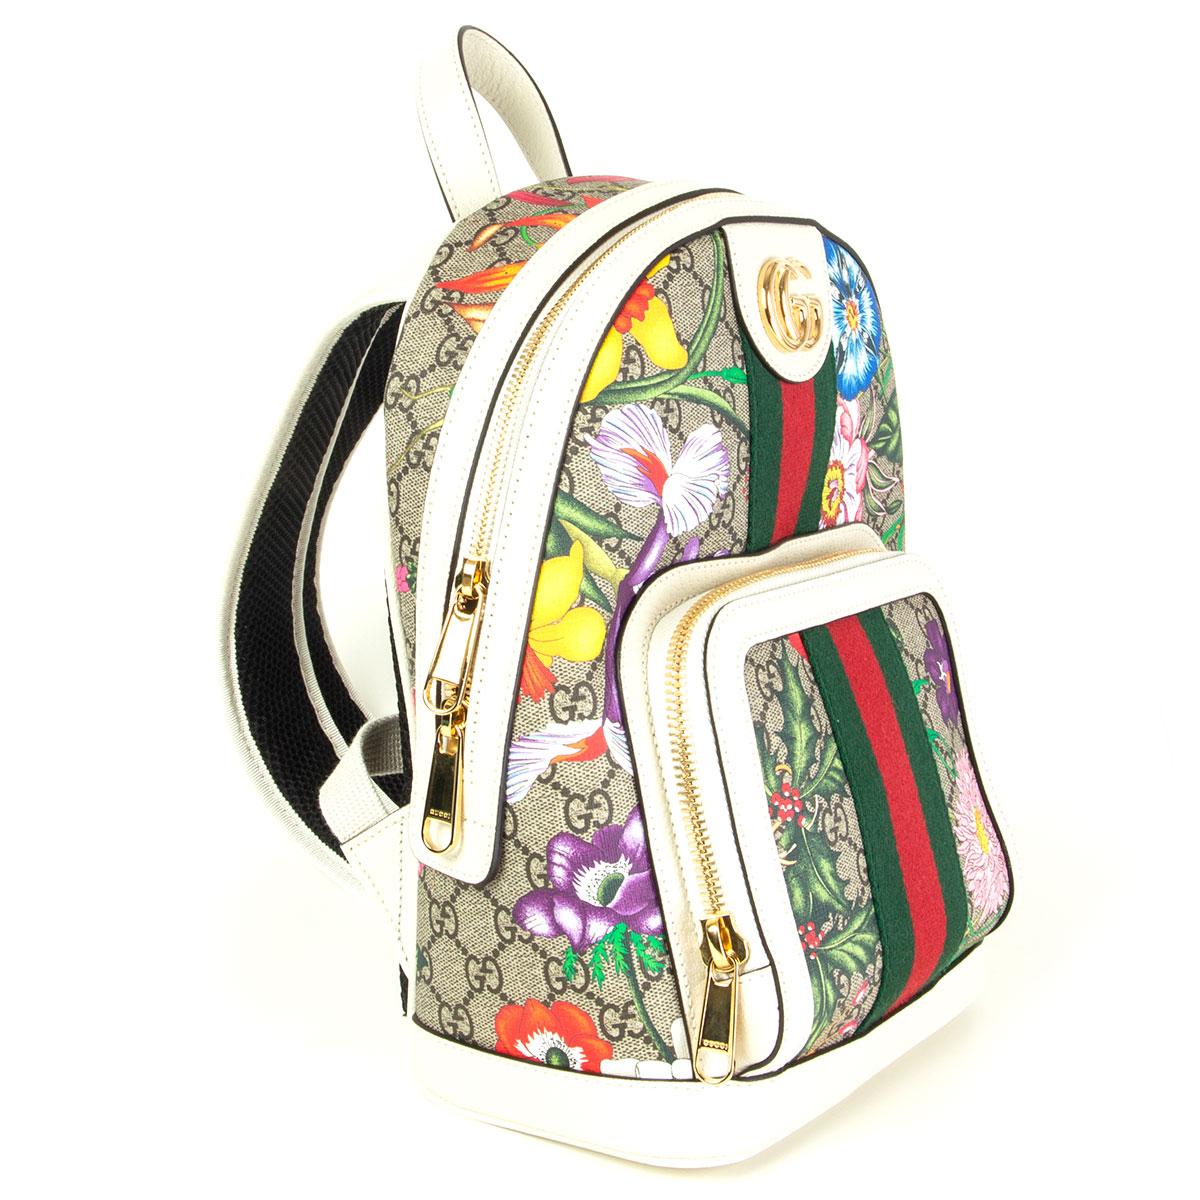 Gucci backpack in coated canvas featuring logo pattern in beige and brown. Multicolor floral pattern and grained leather trim in white throughout. Leather carry handle at top. Twin padded adjustable shoulder straps. Signature striped webbing trim in